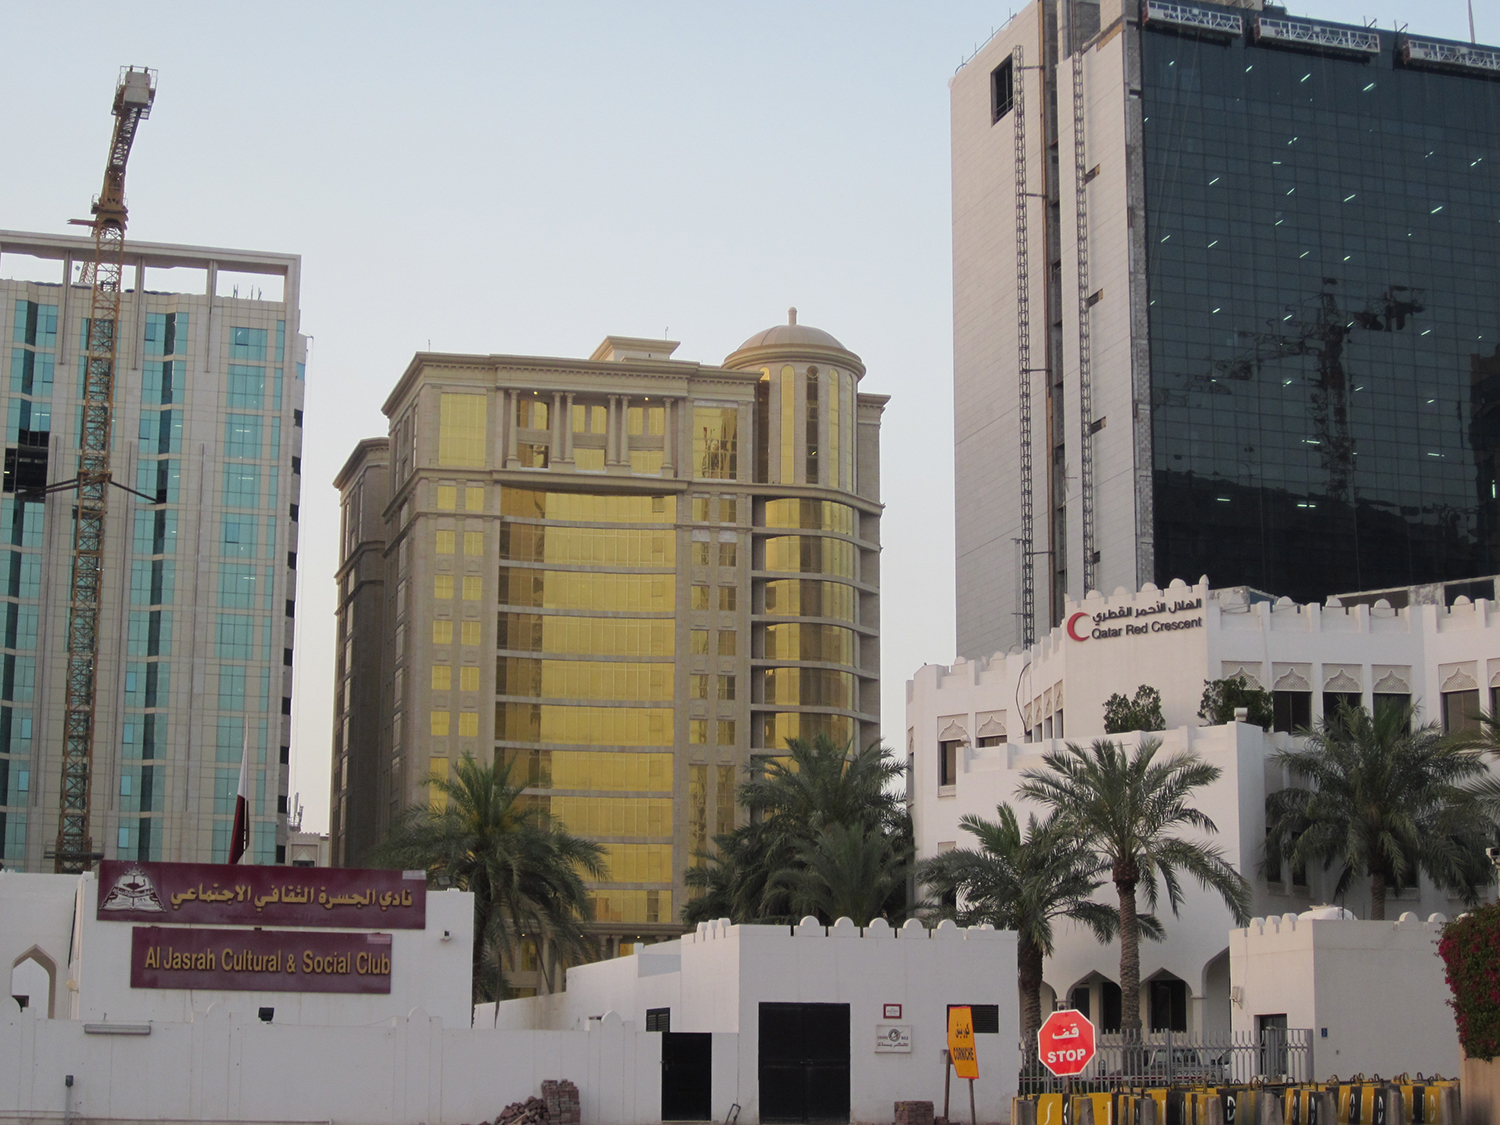 View of Red Crescent Society, al Jasrah Culture and Social Club, and new (2014) construction from Movenpick Hotel on The Corniche.